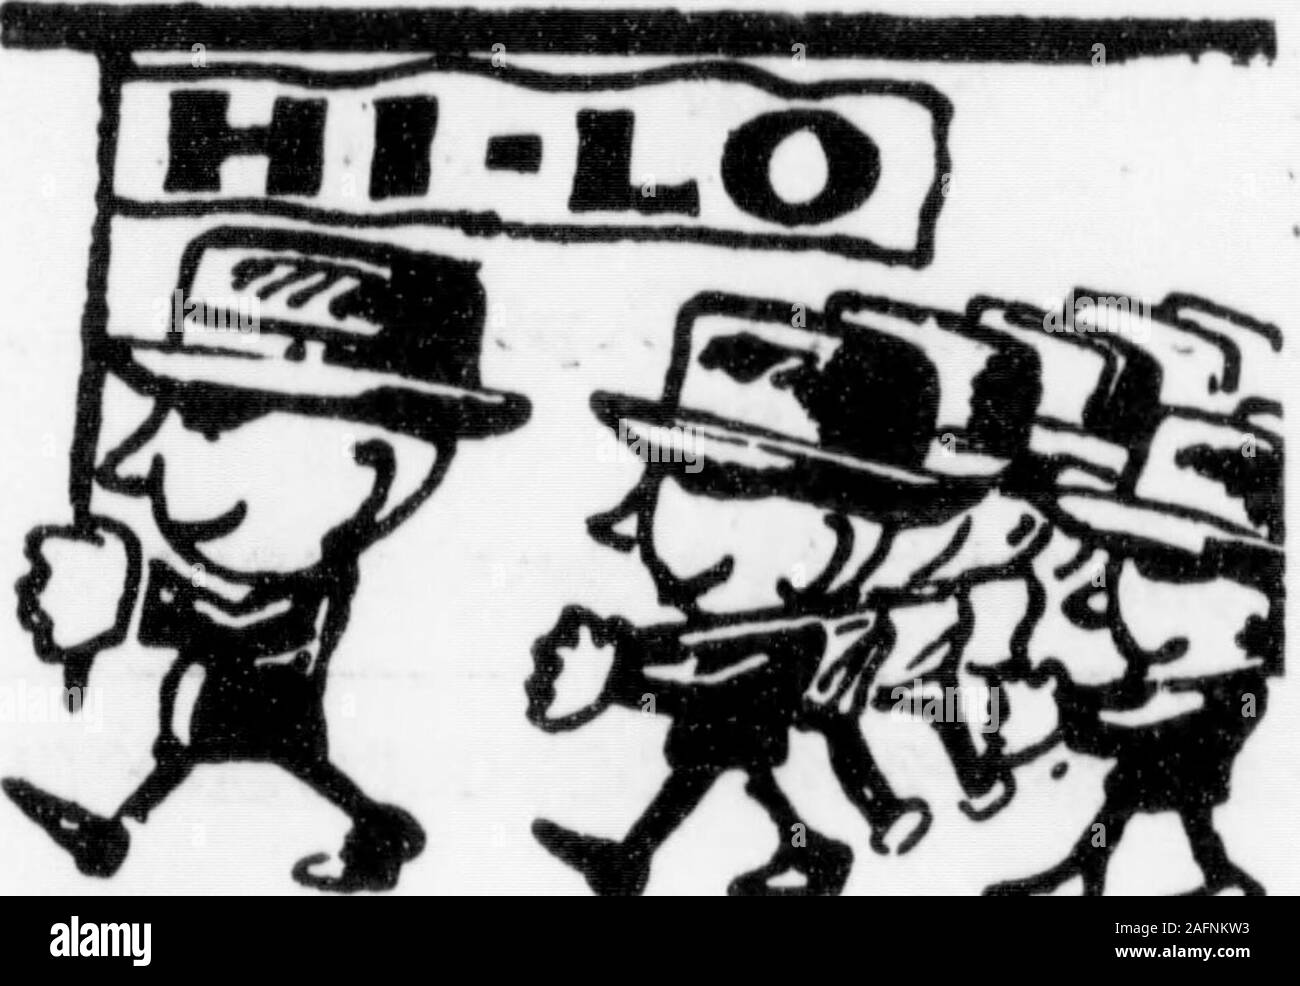 . Highland Echo 1915-1925. Shoe Repairing The Candy Kitchen— Coney Islands 1 NOVEMBER 3, ld22 THE HIGHLAND ECHO 8 ?? —— - *iw^™ii ?MMiiititi ??? ??? I ?t«^tt«^, CHANDLER-SINGLETON COMPANY It EVERYTHING THAT YOU WEAR (fi-ii- -??——m—»????—»a»ii—»M*—iHH—iMi?????? IN I ?? ? iii—n*—g—m—ta^^ii—*iii»Pi*inN—n»????—??« tl I ??—??Bt —Ih—»(H iBH^^Mg» ?Hit—??——??—????-???I-I »«-»«?????? 11 II ?? n|&gt; LOVE MADE ALL THINGS POSSIBLEBefore the birth of love, manyfearful things took place throughthe empire of necessity; but whenthis god was born all things rose tomen.—Socrates.. ^eyholdtl)eir^rs UJiU })Qld t Stock Photo